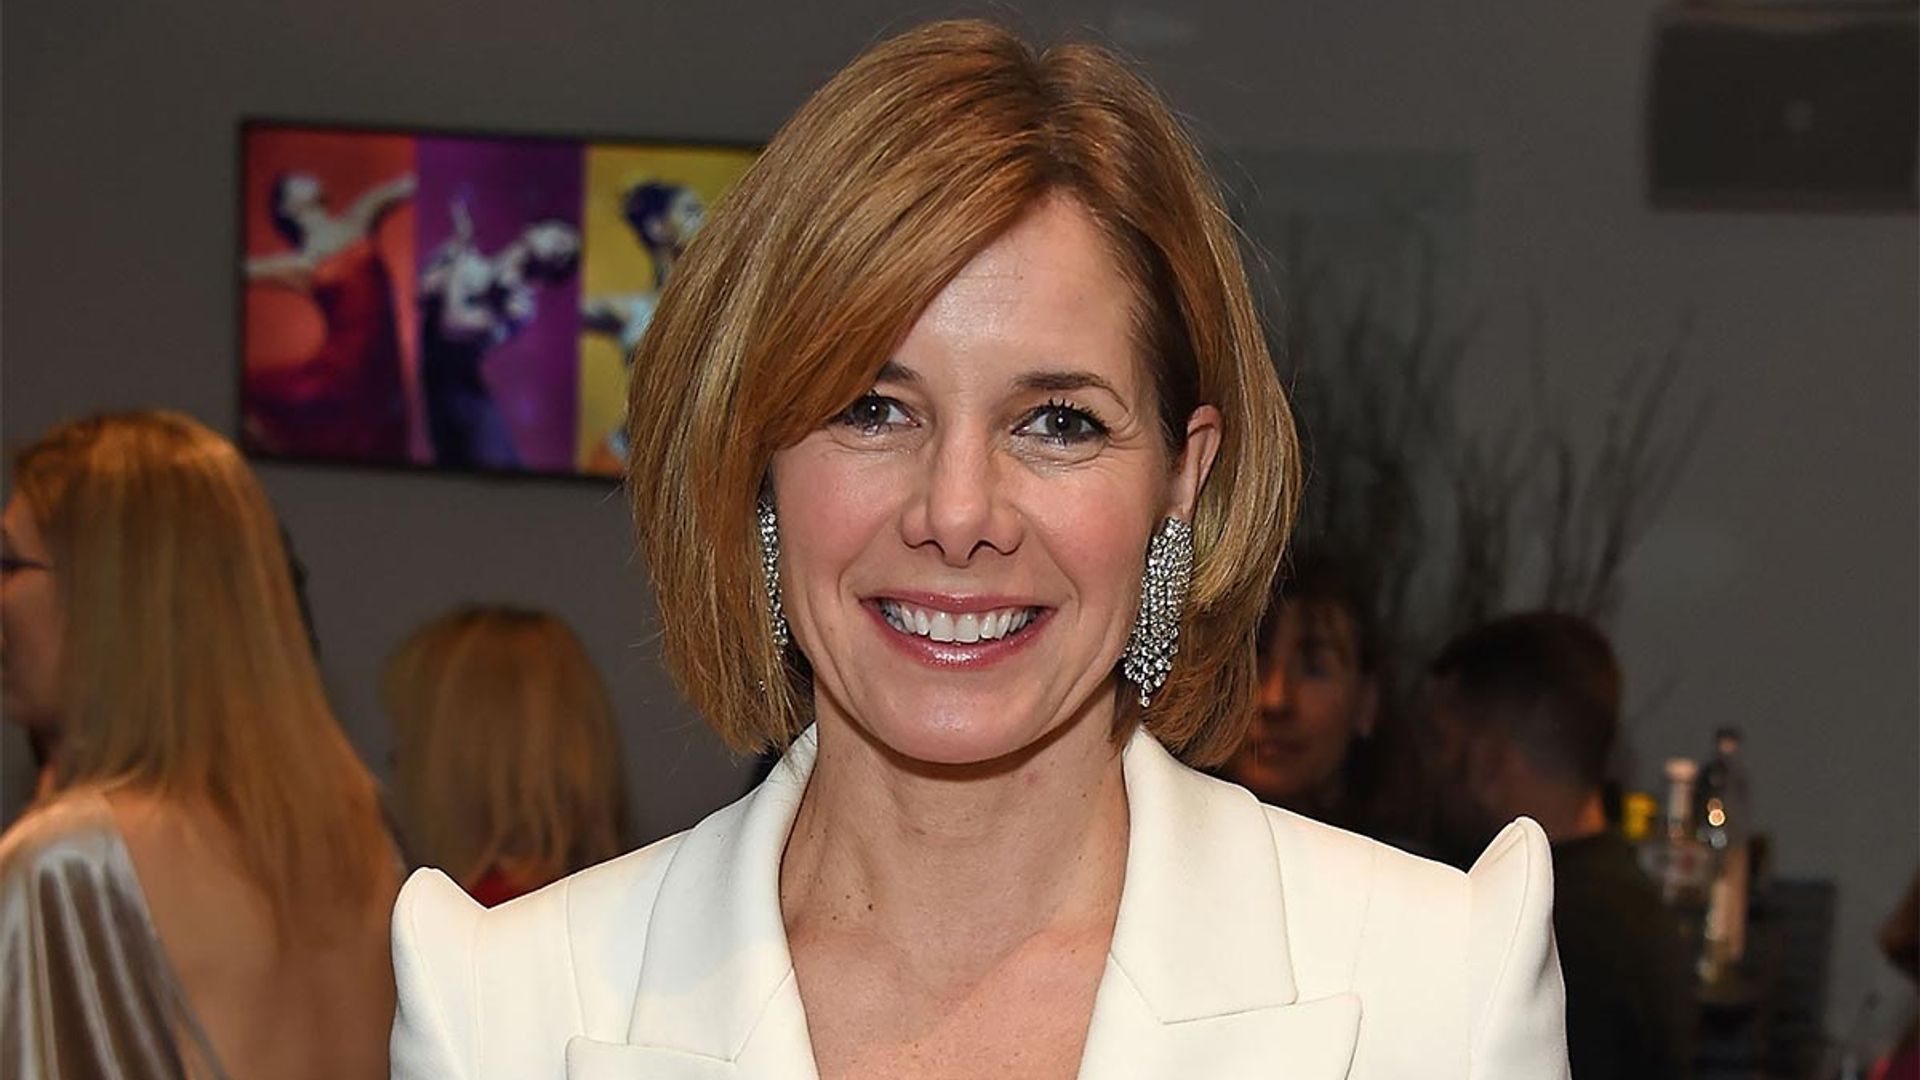 Darcey Bussell's surprising plans after quitting Strictly Come Dancing revealed